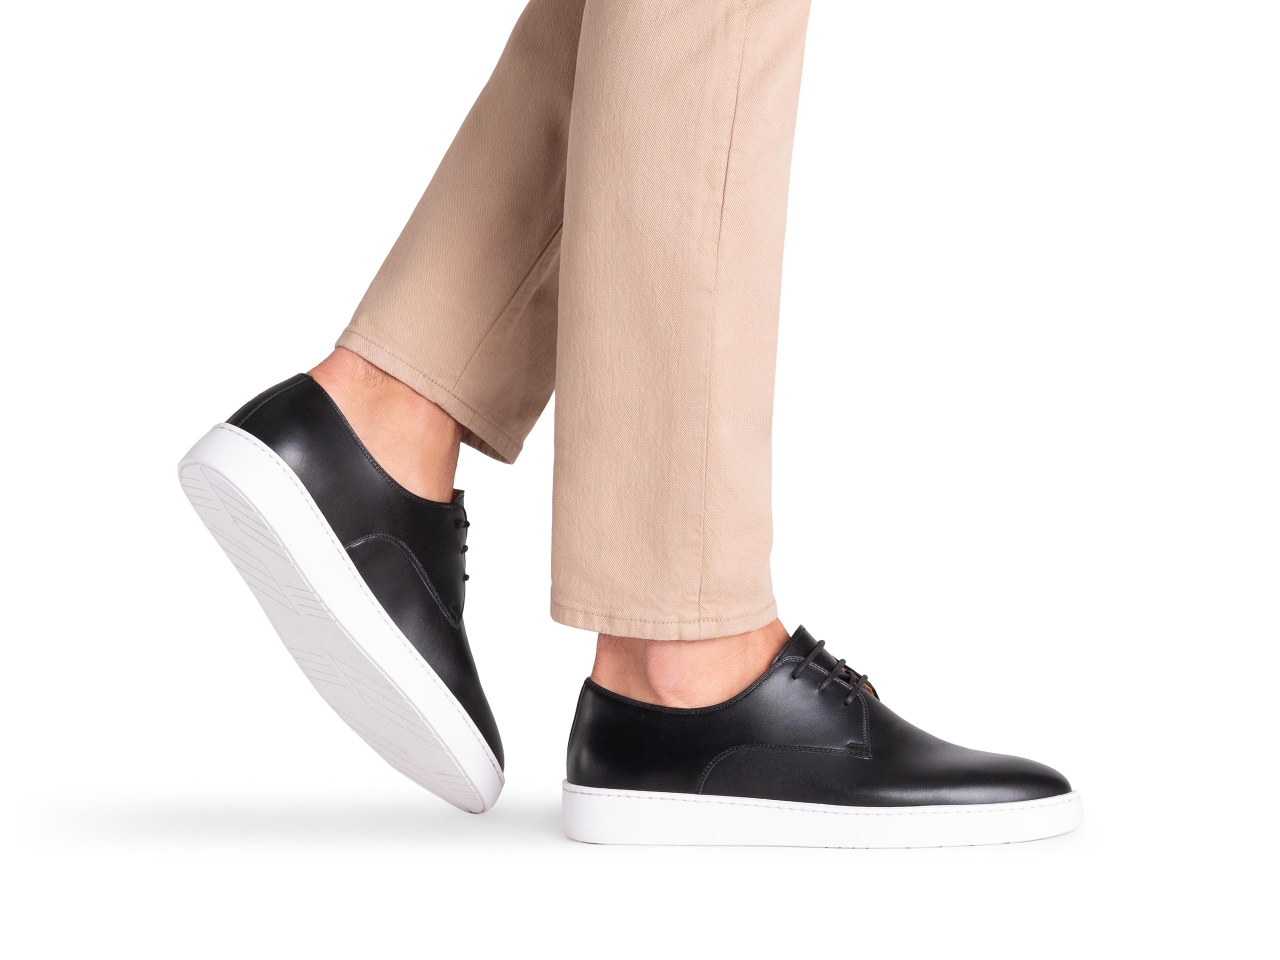 The Lonzo Black pairs well with light khaki pants